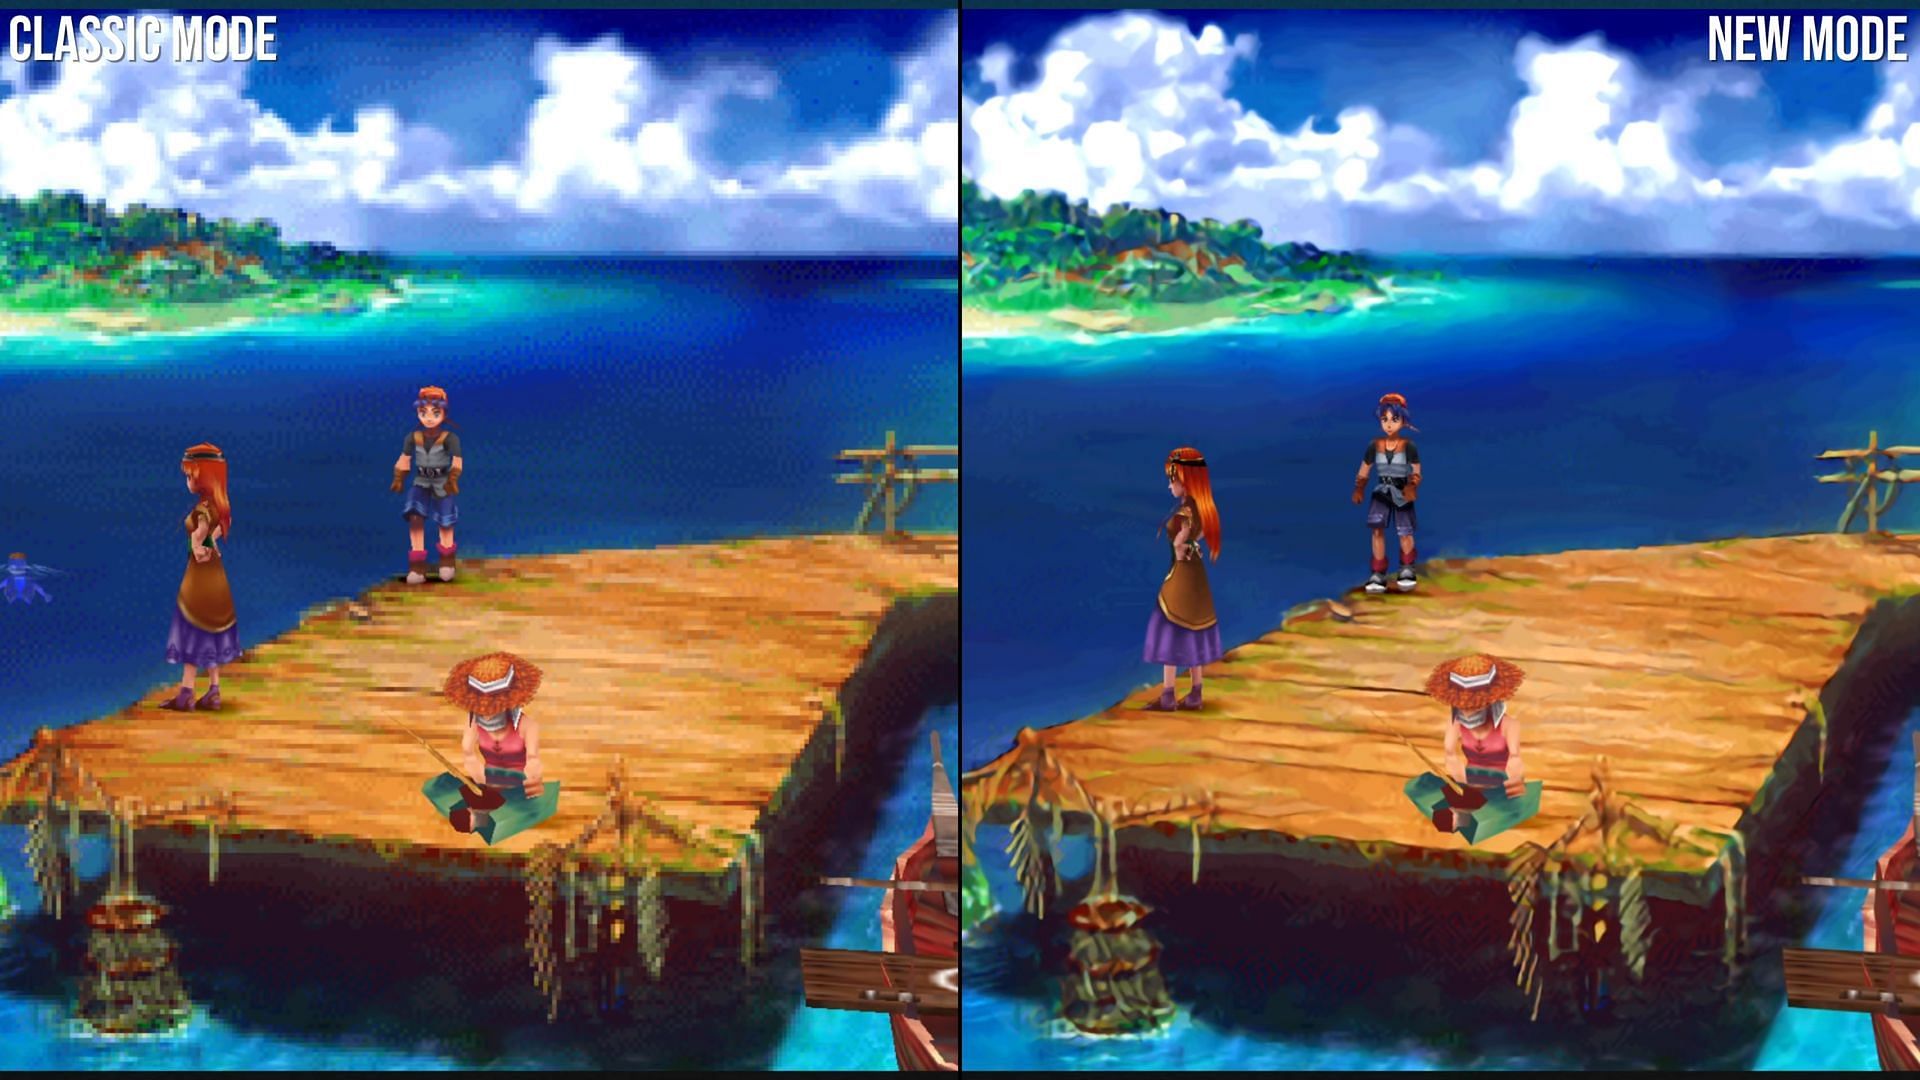 Note the light/dark spots in the ocean in the background on the right panel (Image via Digital Foundry)